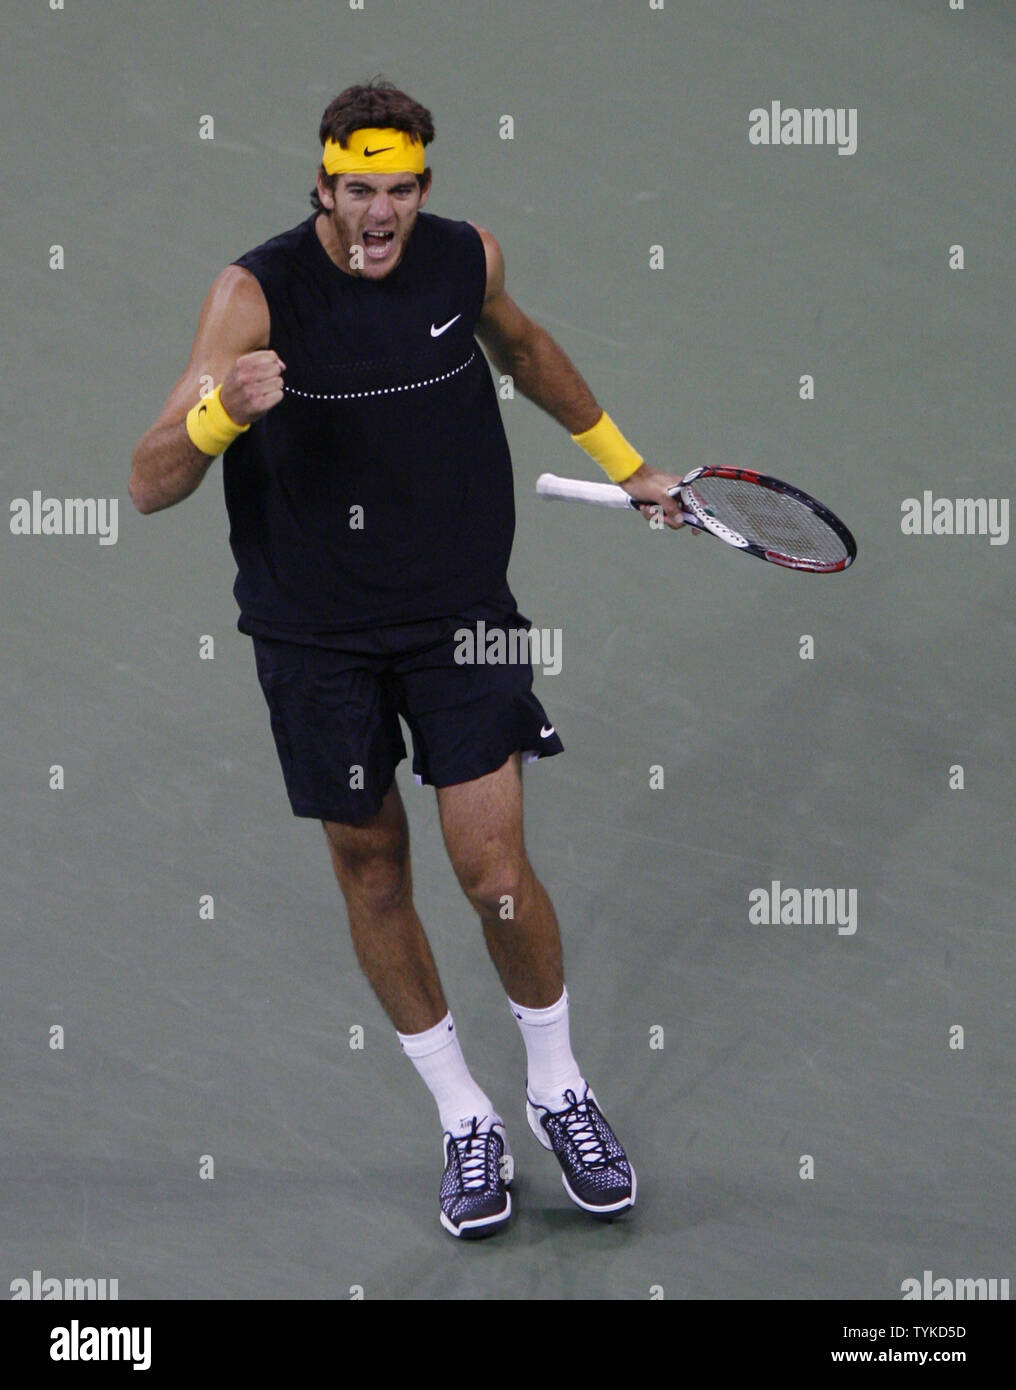 Juan Martin Del Potro of Argentina reacts after winning the fourth set against Roger Federer of Switzerland in the mens final in Arthur Ashe Stadium at the US Open Tennis Championships at the Billie Jean King National Tennis Center in New York on September 14, 2009.     UPI/John Angelillo Stock Photo